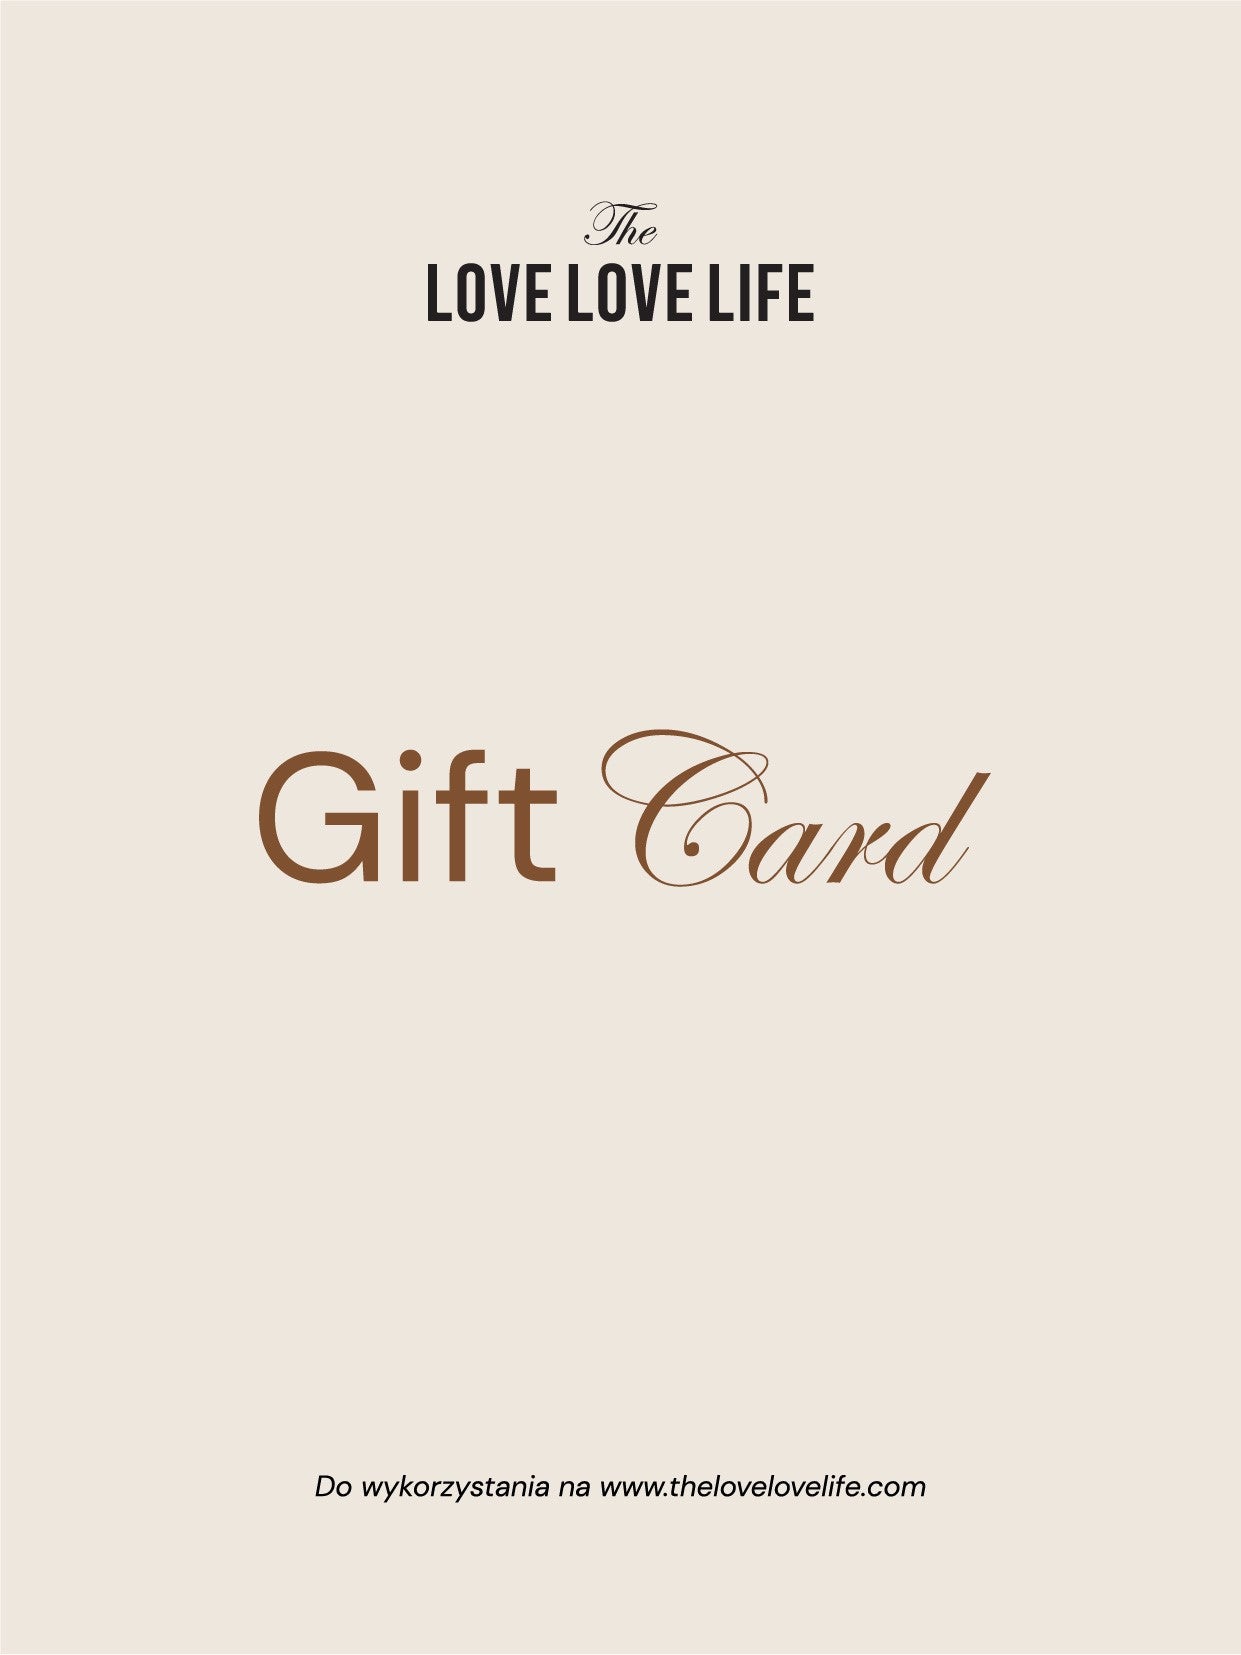 The Love Love Life Gift Card